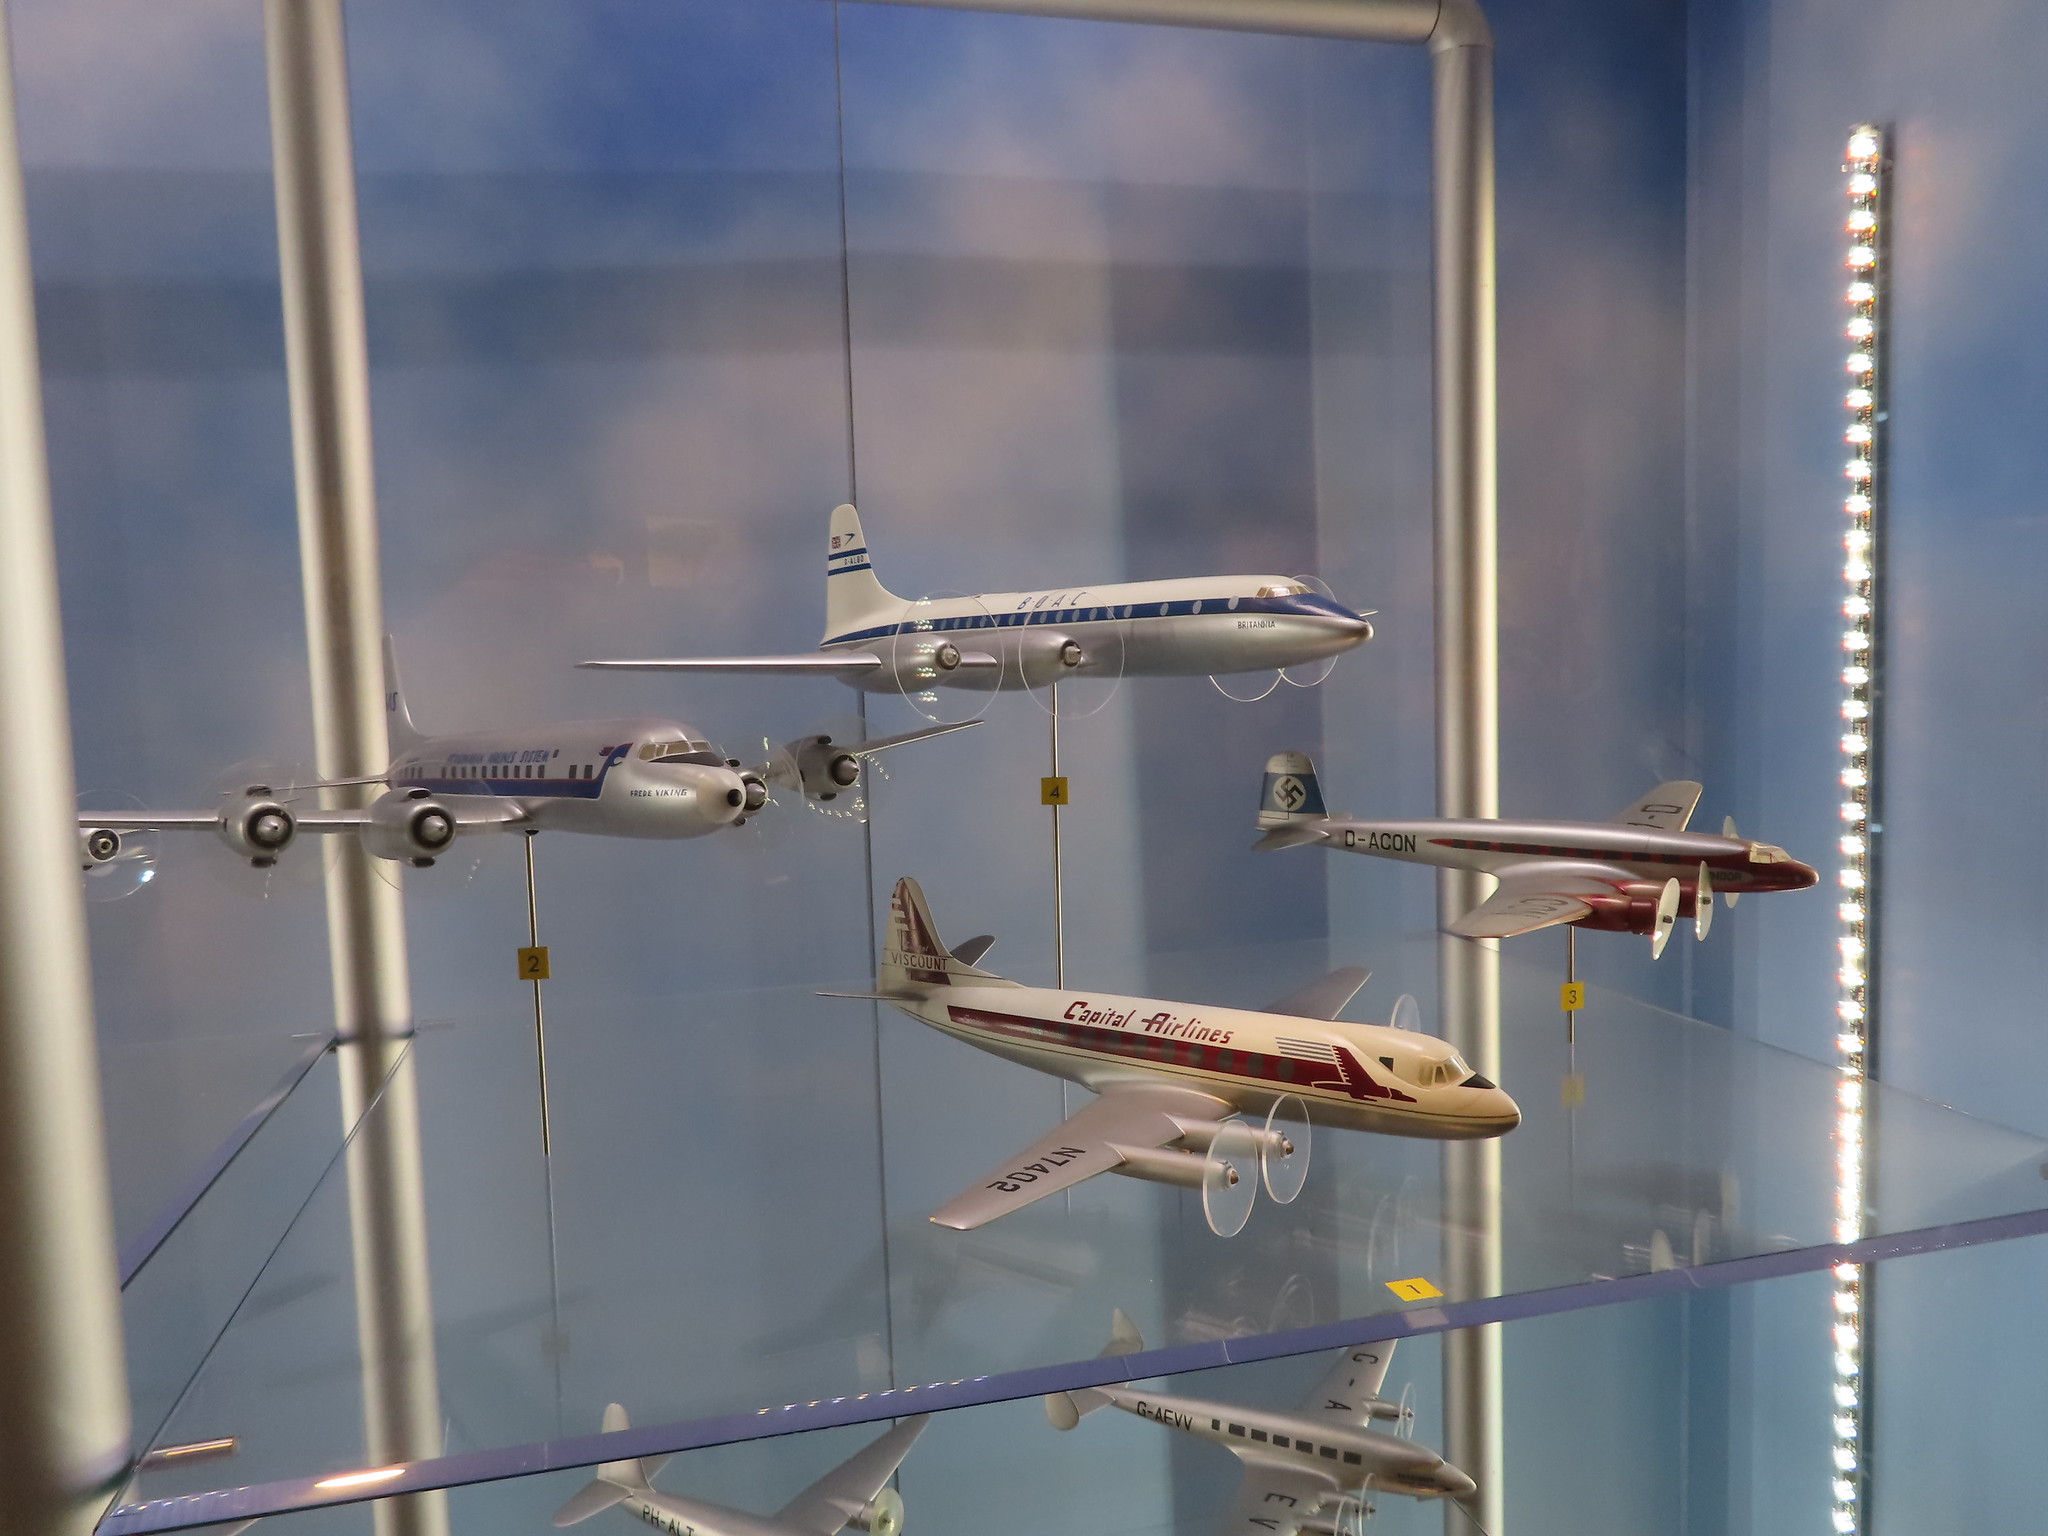 Miniature models of airplanes used the by the military exhibited in a shelf at The National Museum of the U.S. Air Force, a piece on the best things to do in Ohio